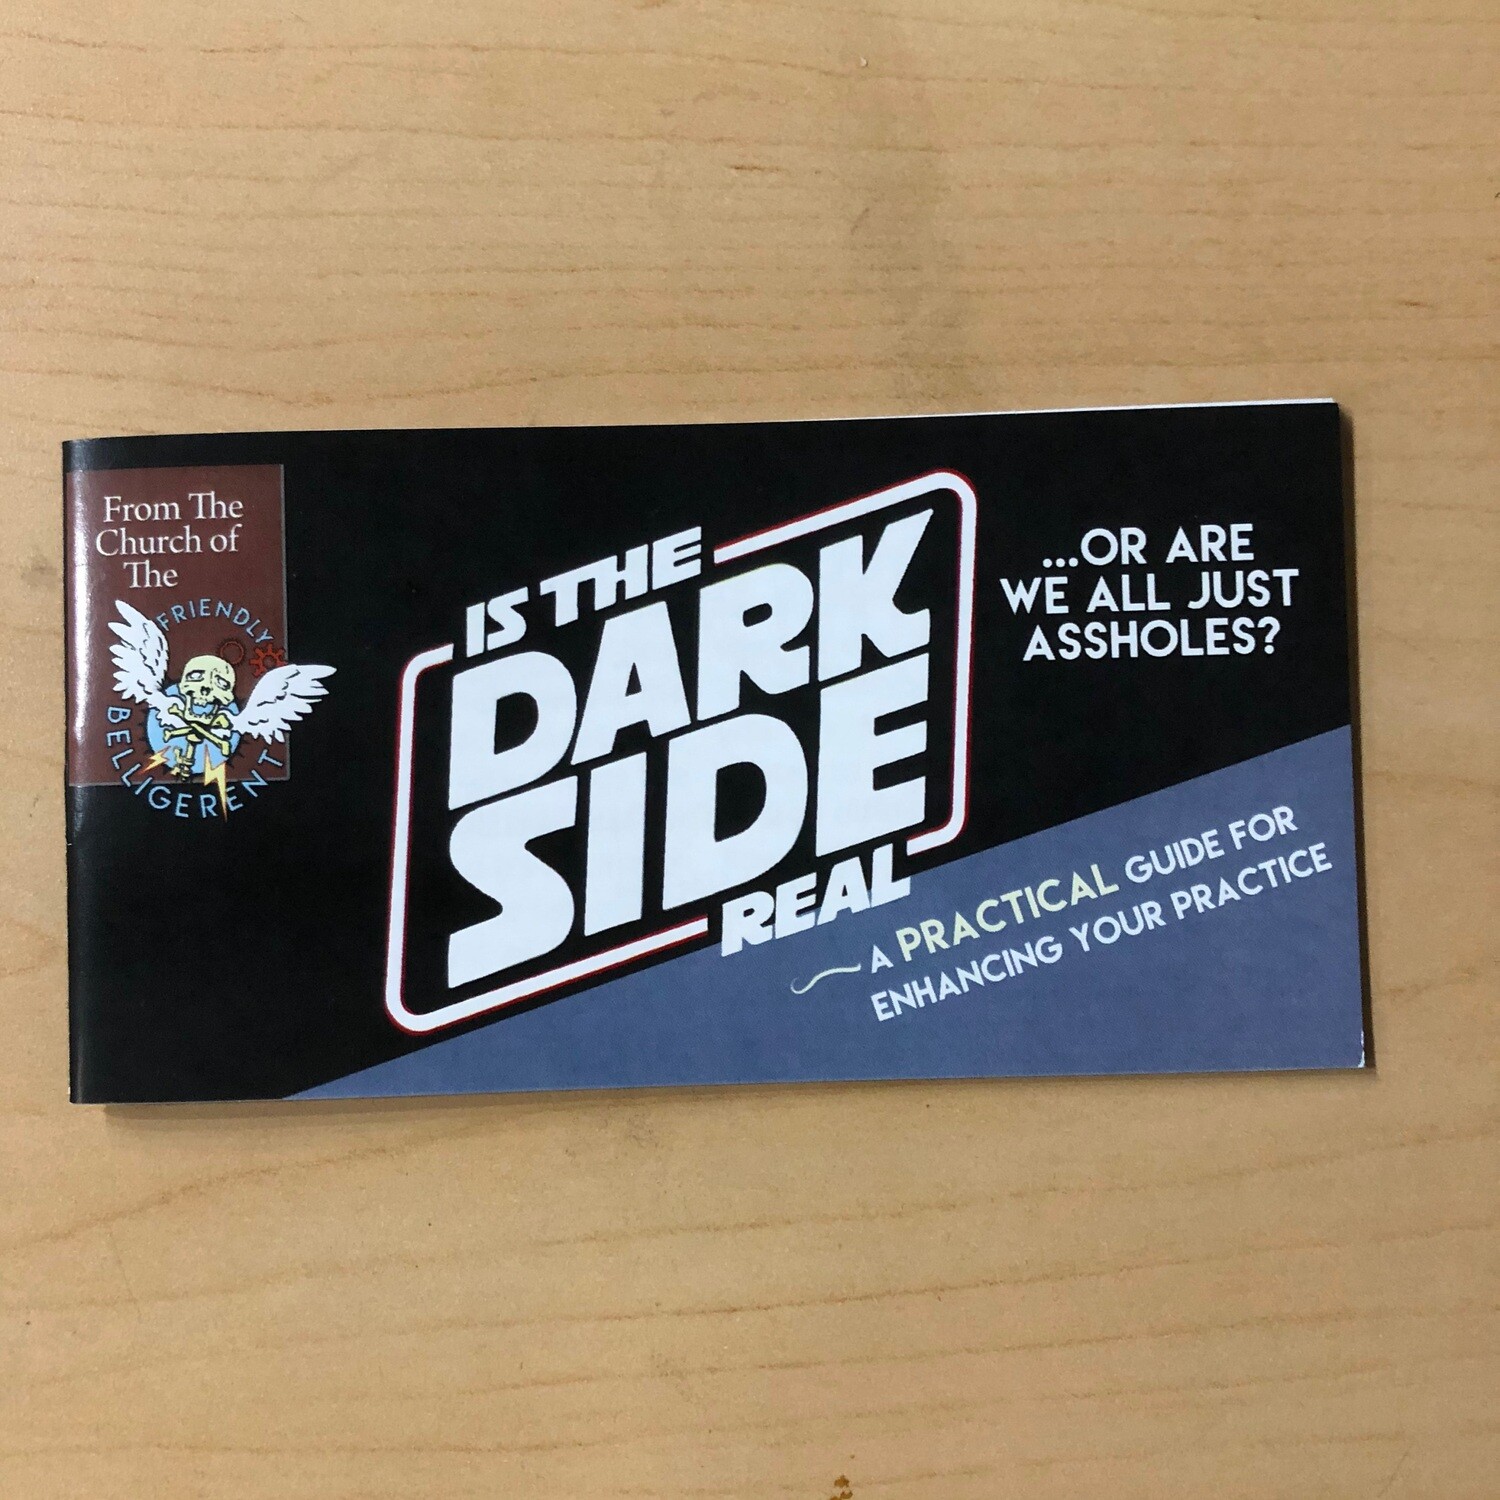 Is The Dark Side Real Or Are We Just Assholes? - Booklet by J. James McFarland